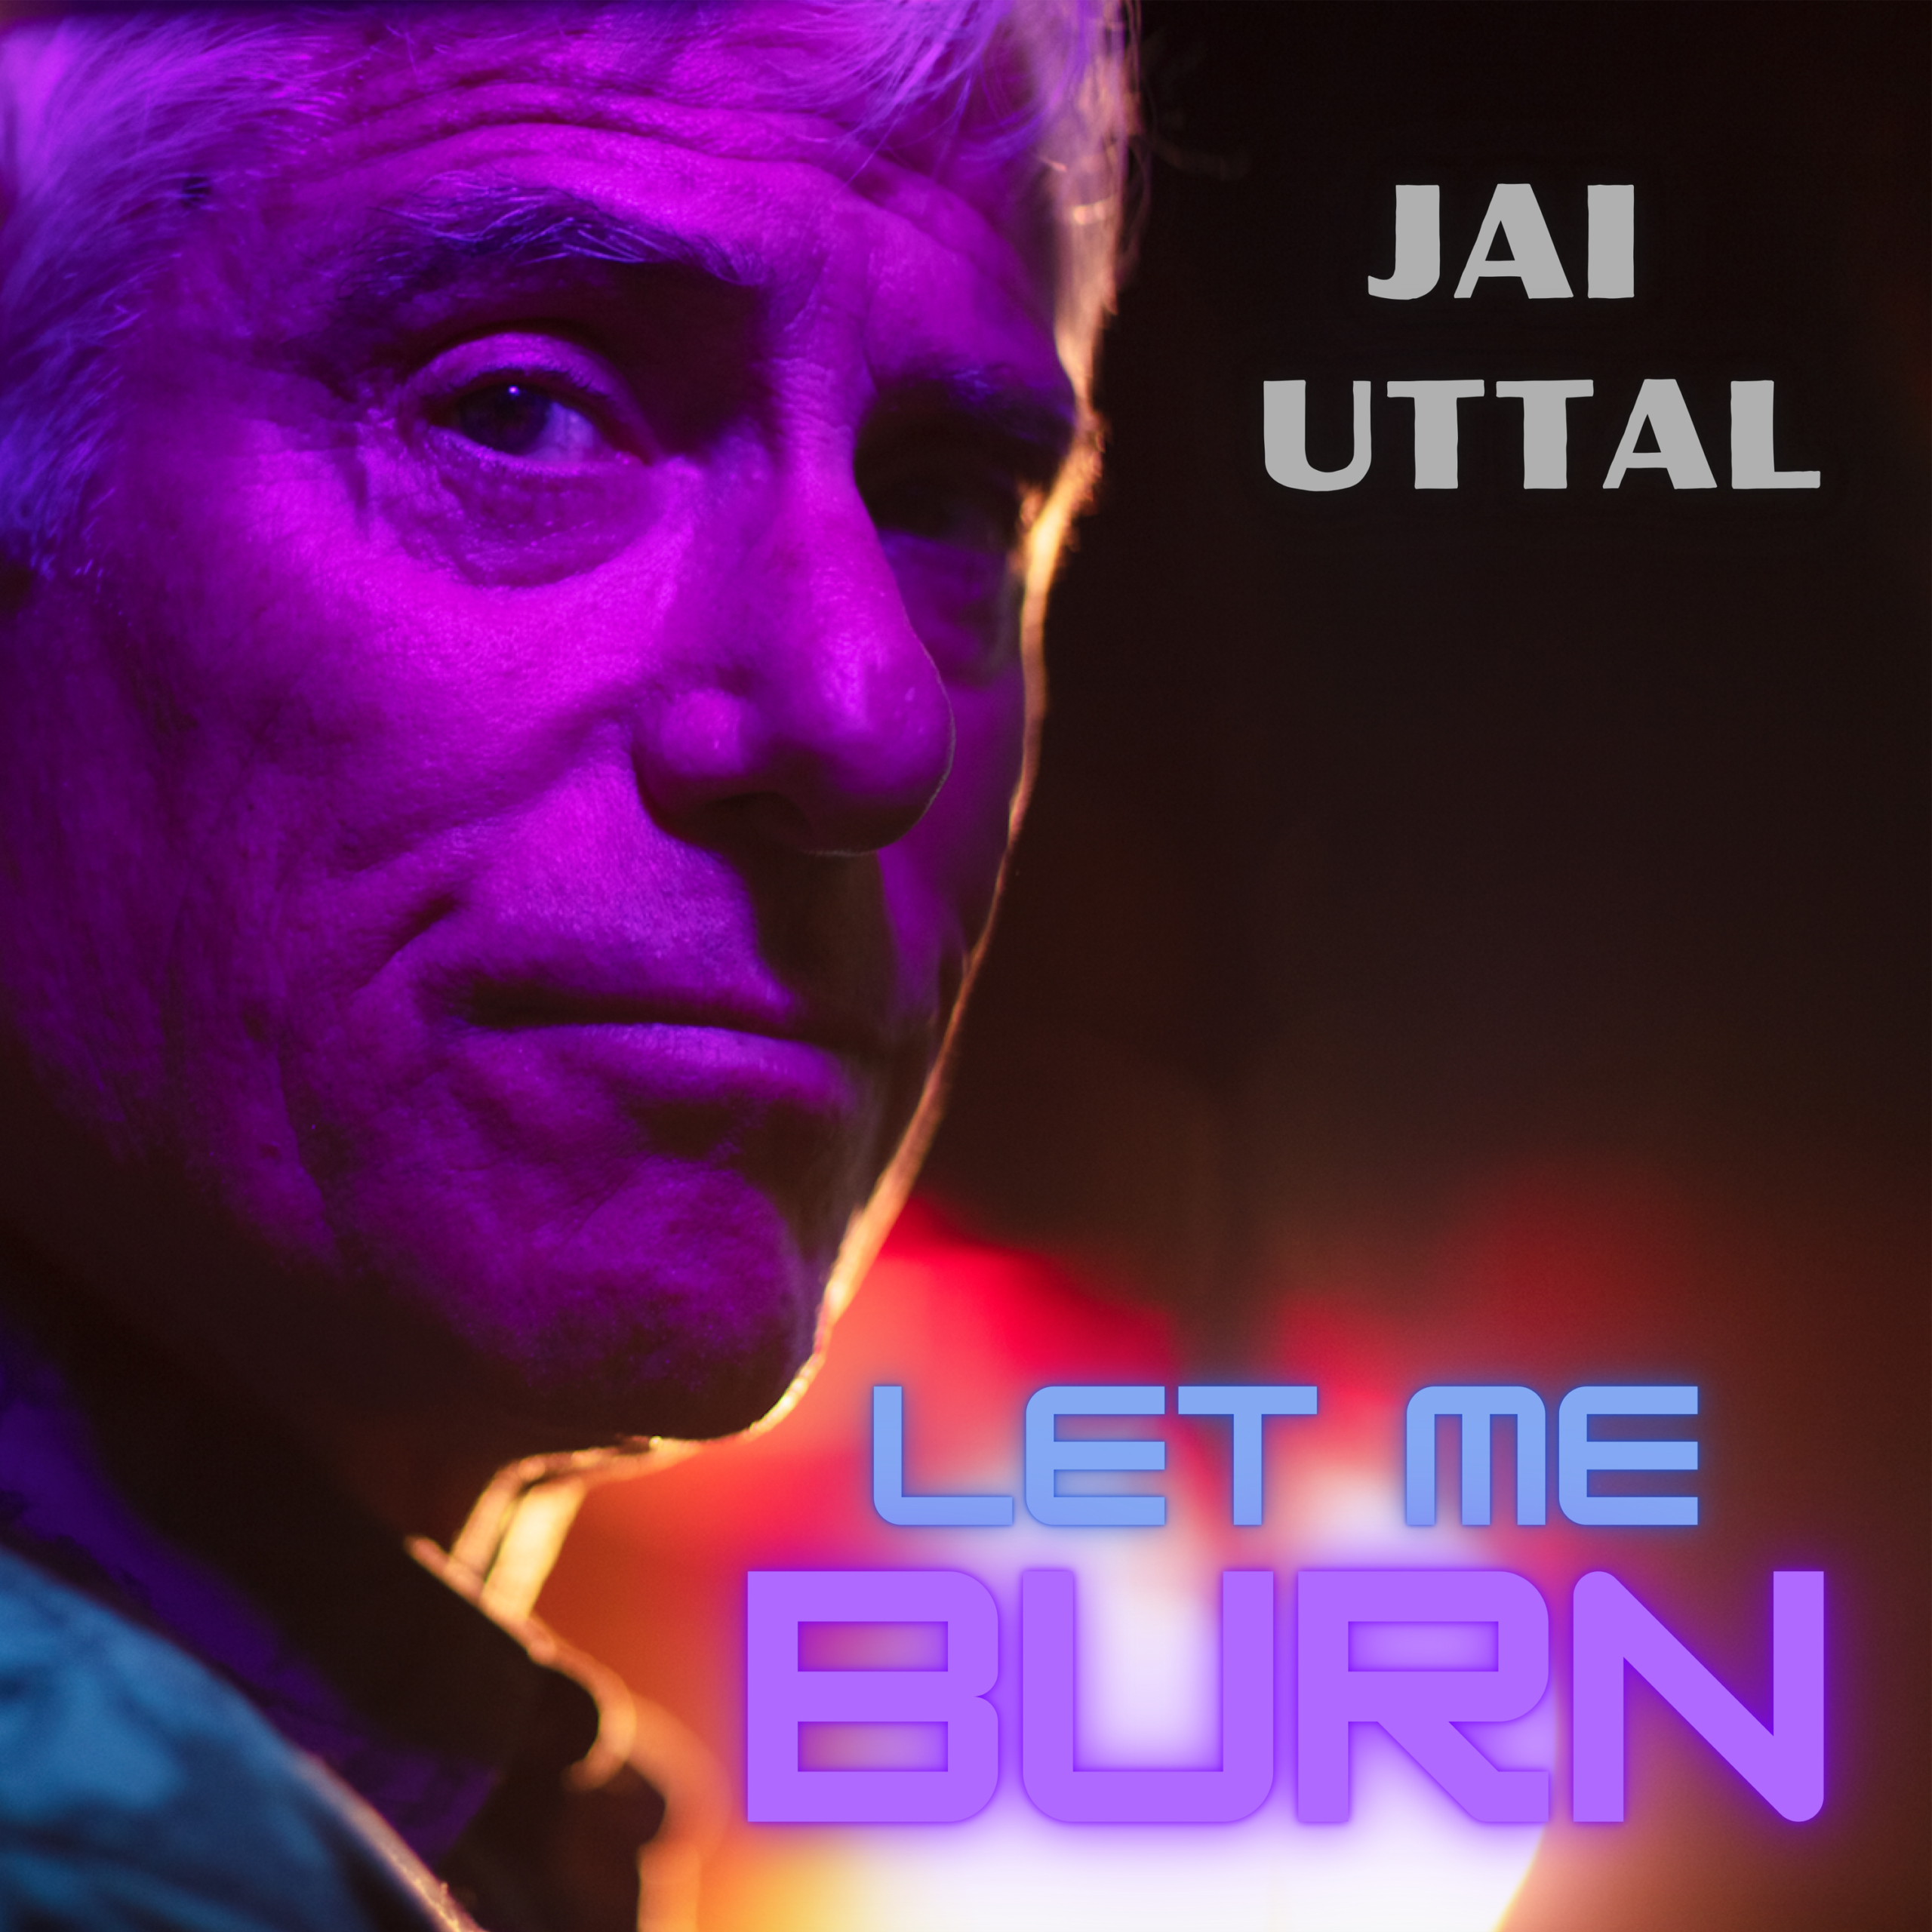 Jai Uttal, Let Me Burn, Alan di Perna, One of America's foremost music scribes, Alan di Perna has been writing professionally about popular music and culture since 1980.